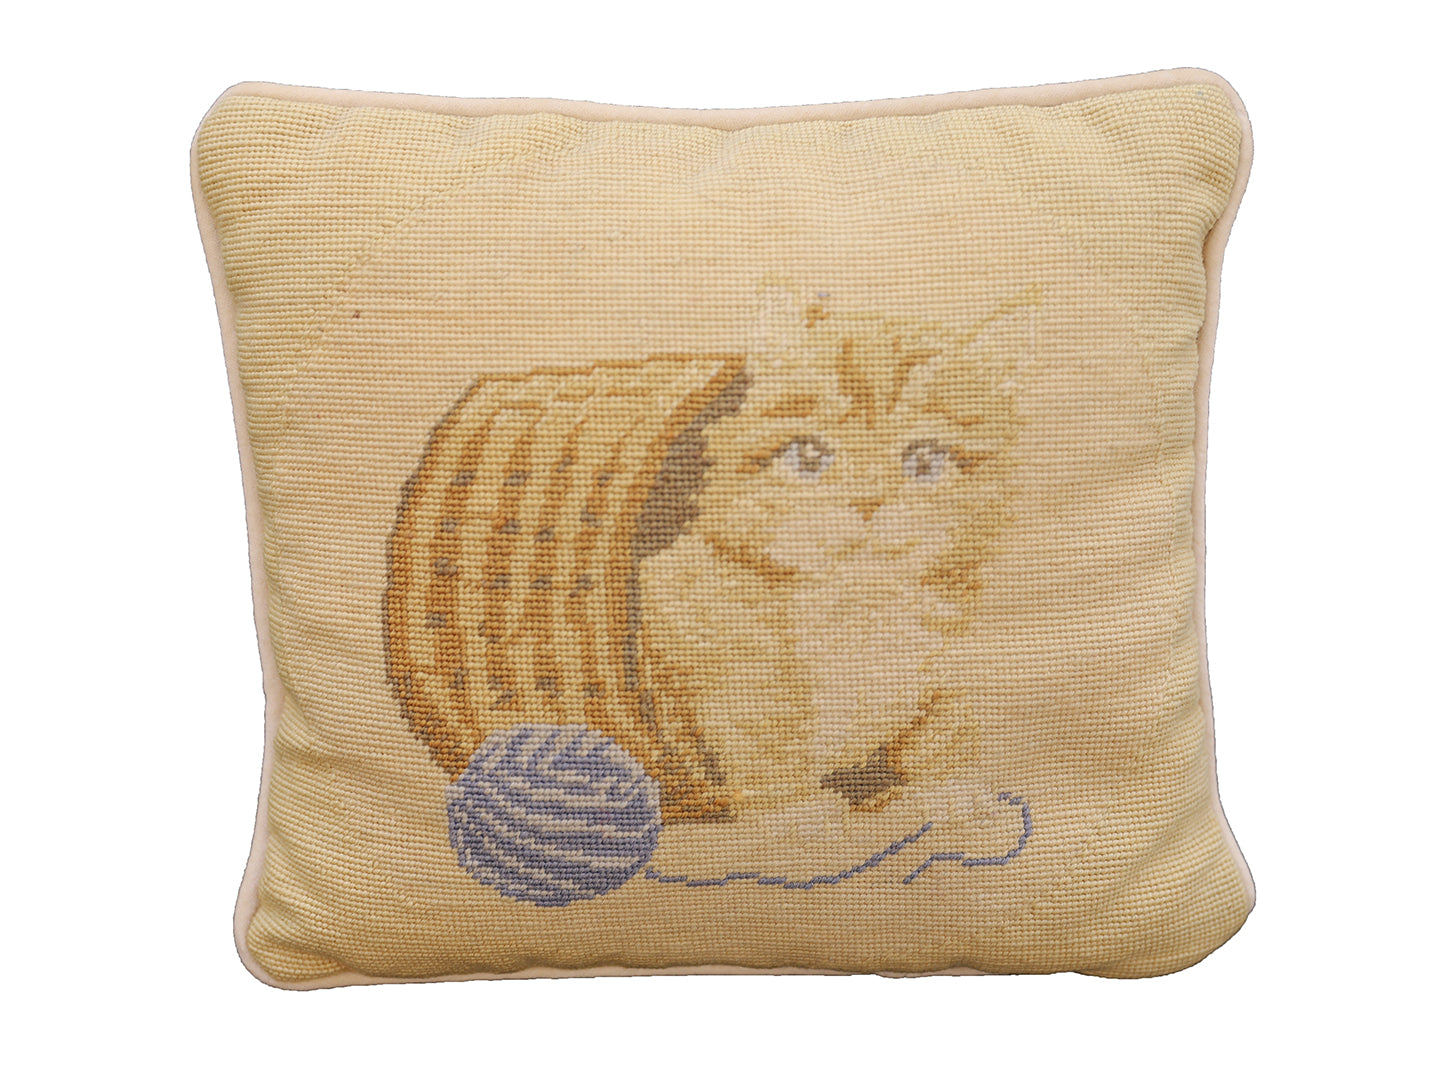 10"x10" Pictorial Hand Embroidered Little Cat Pillow Case